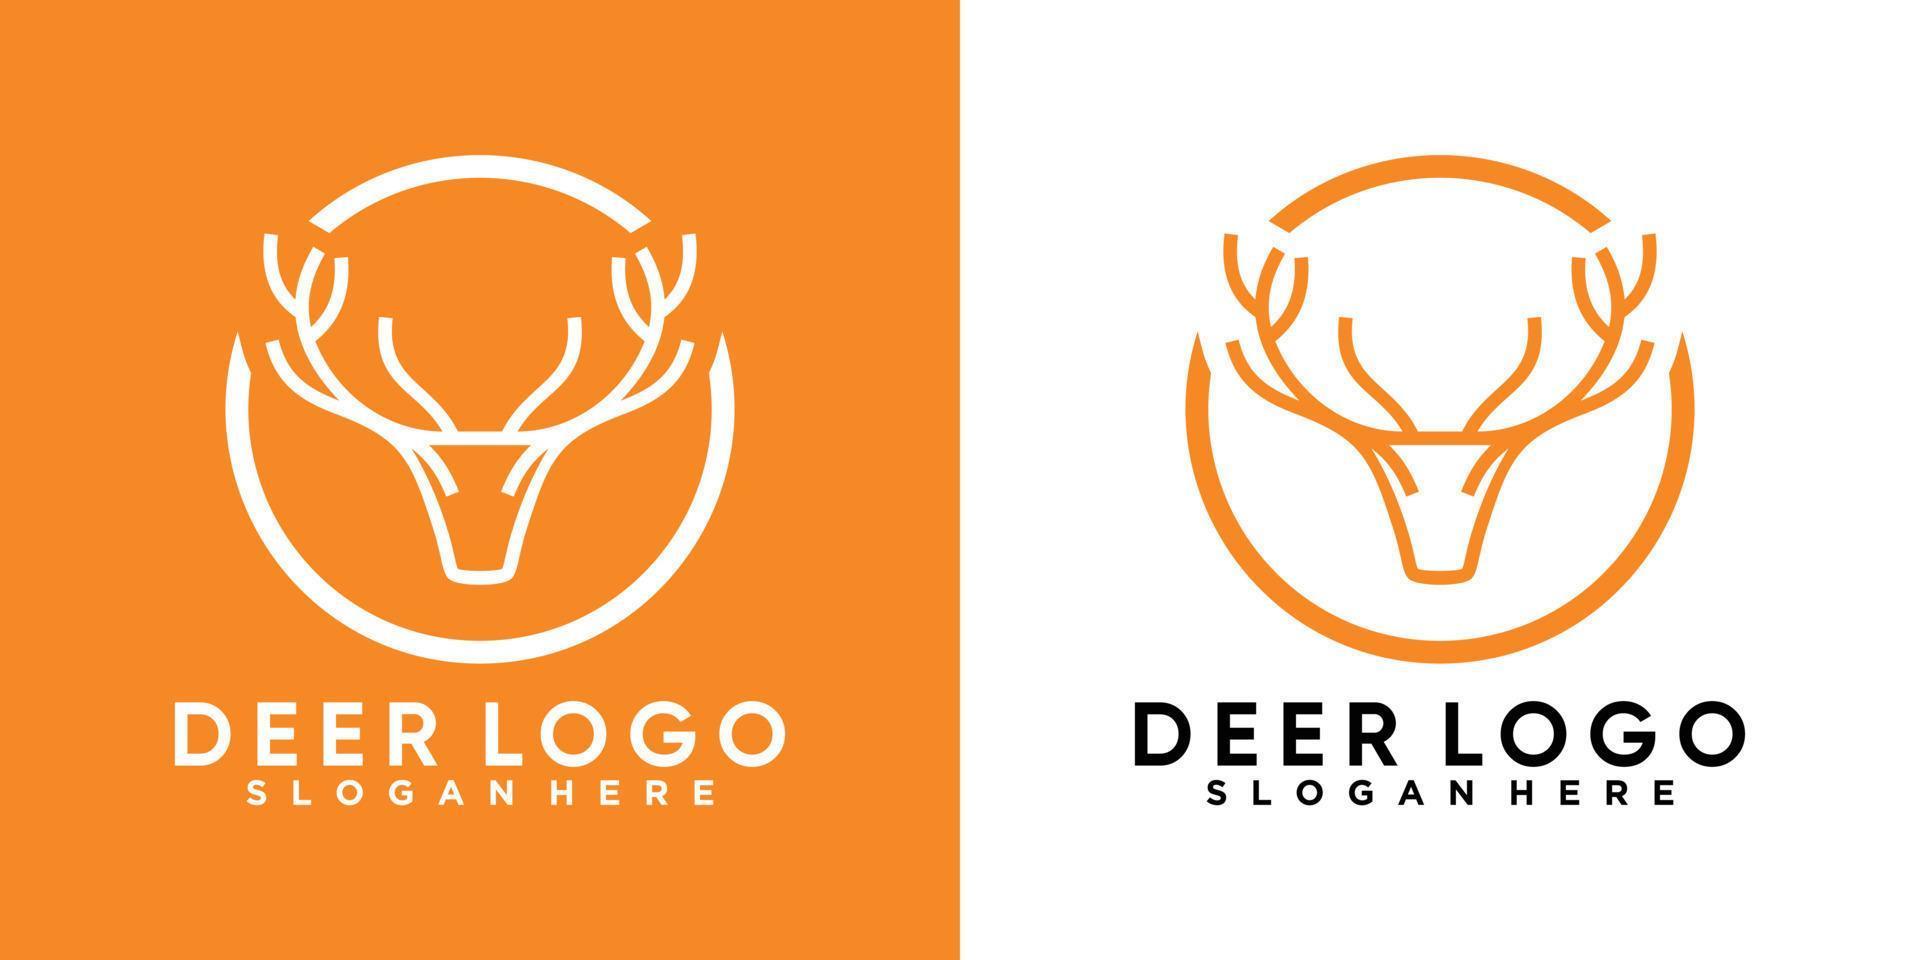 deer logo design with style and creative concept vector